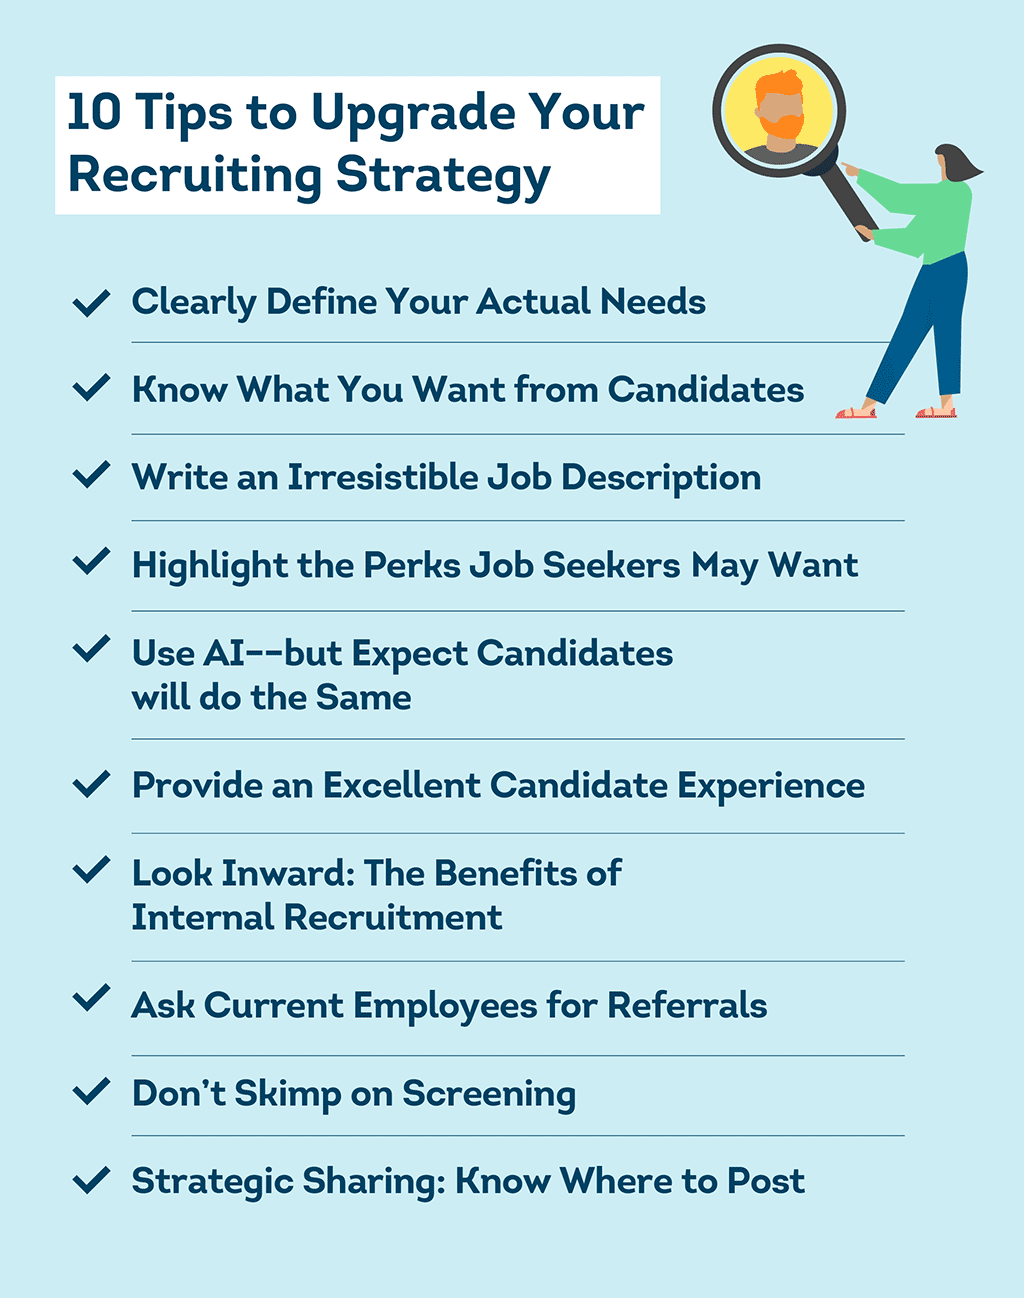 10 Tips to Upgrade Your Recruiting Strategy